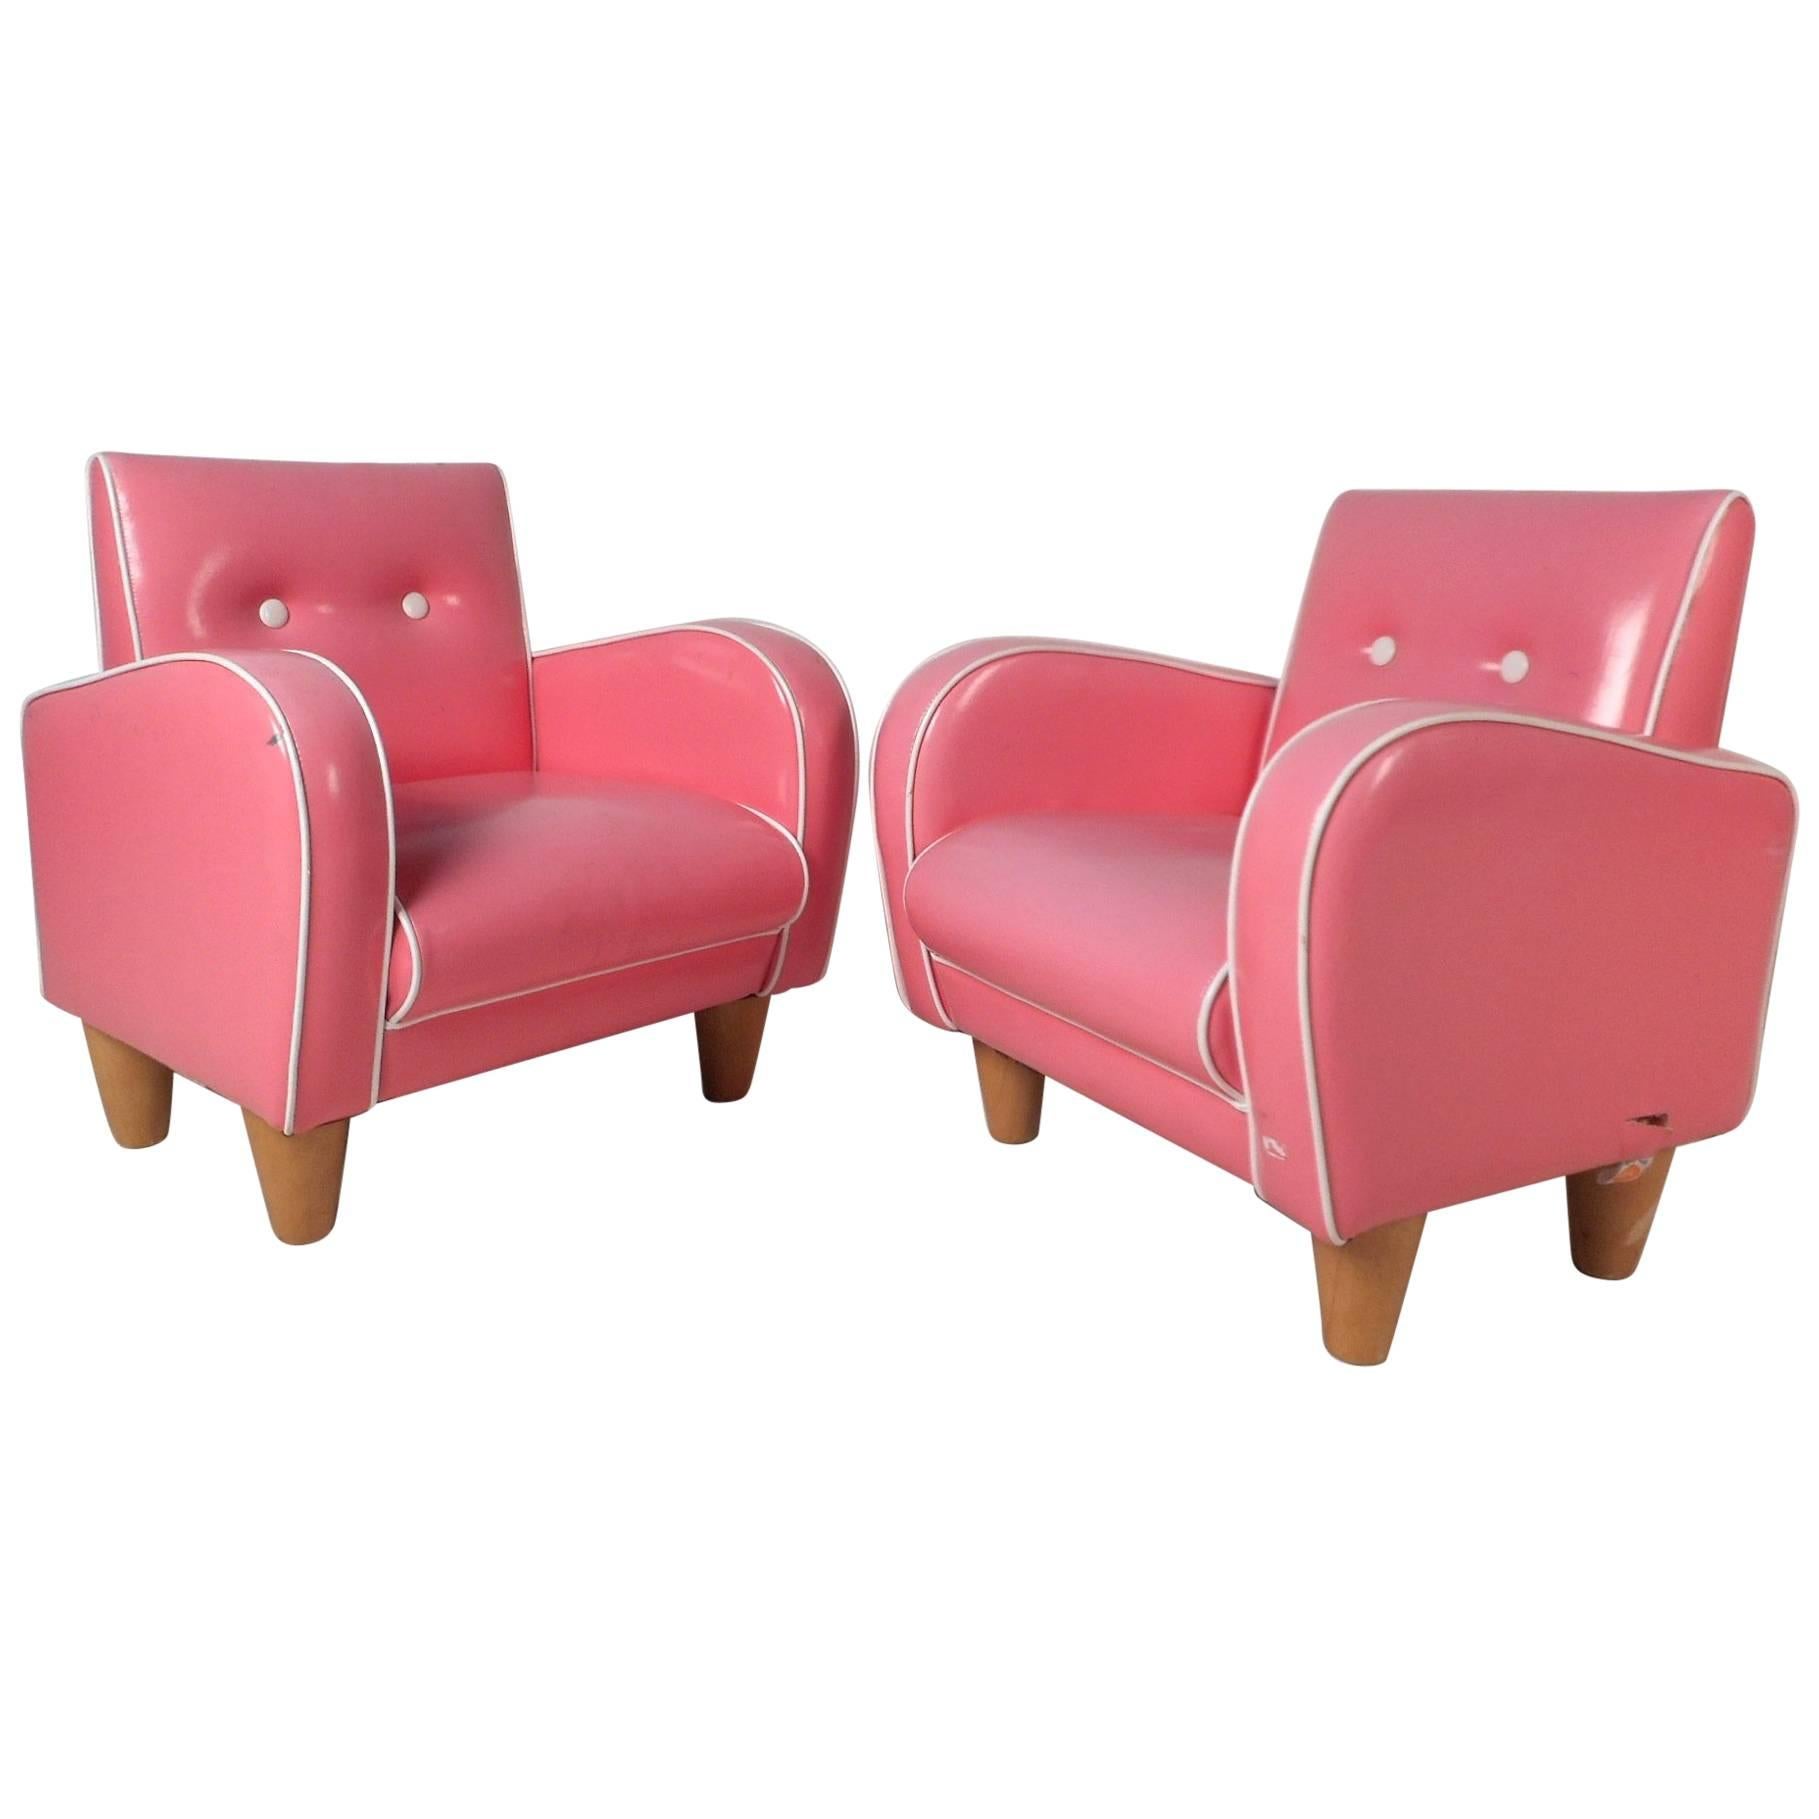 Pair of Children’s Contemporary Modern Pink Lounge Chairs